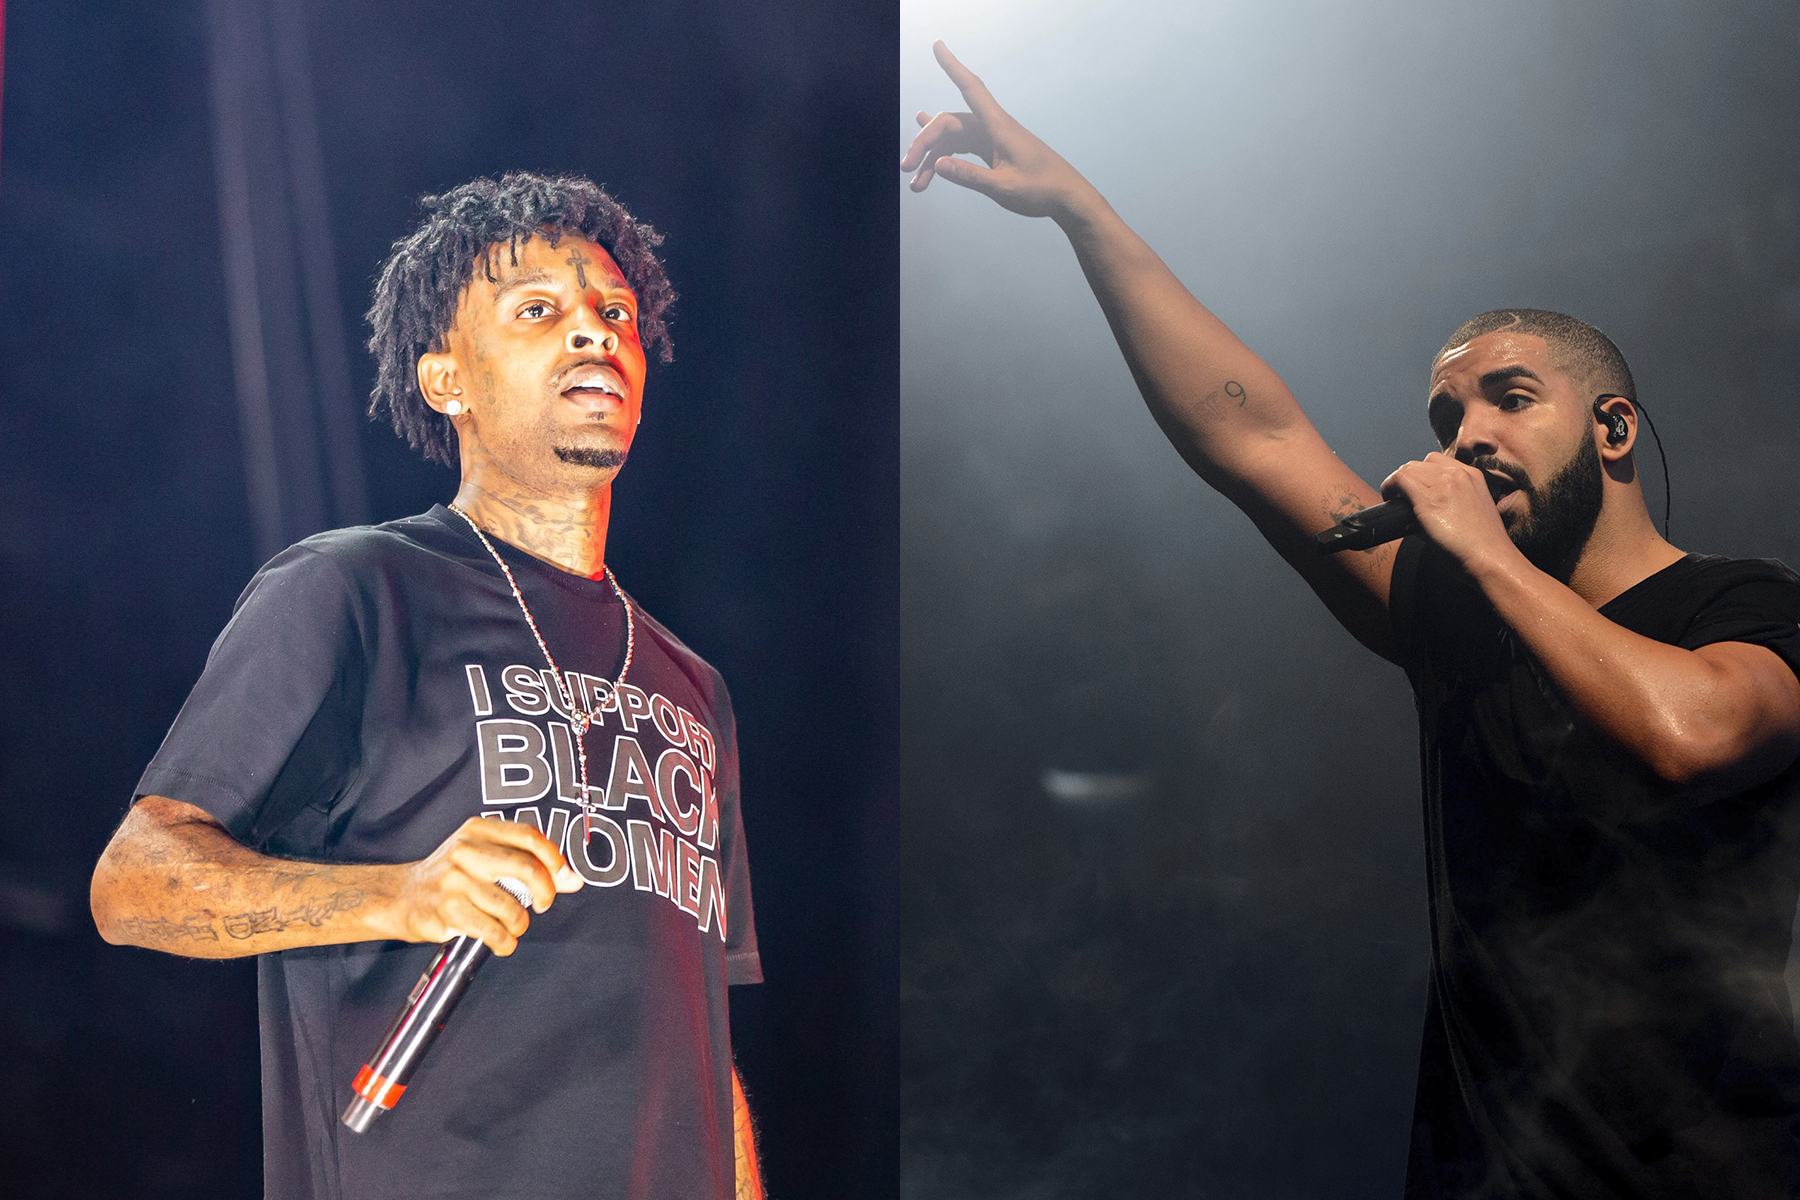 Drake Is Going on Tour with 21 Savage! See the Dates